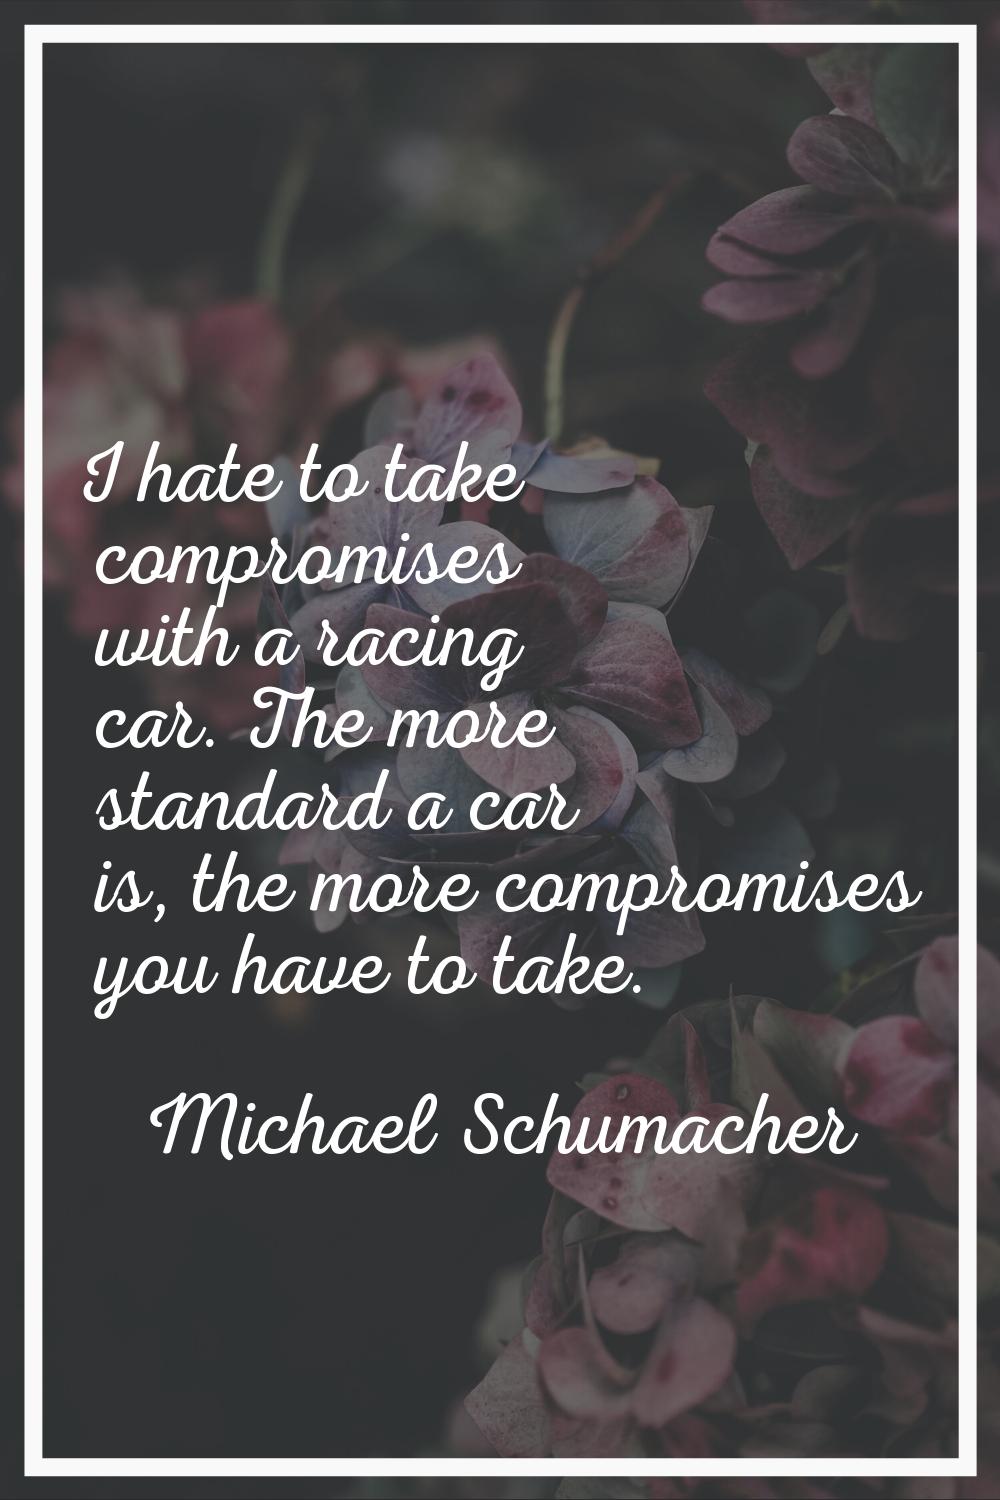 I hate to take compromises with a racing car. The more standard a car is, the more compromises you 